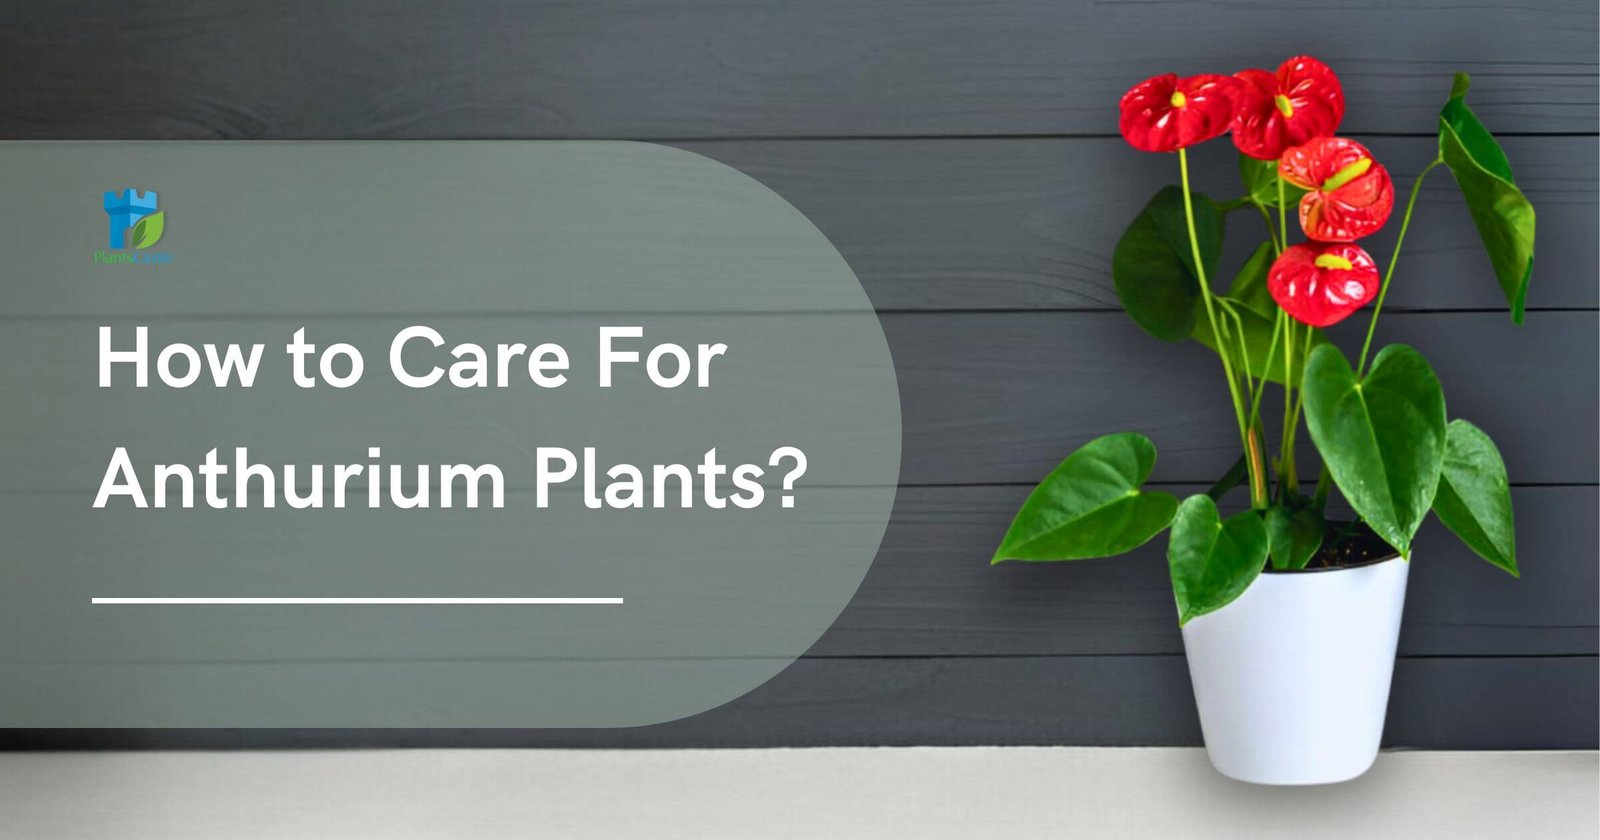 How to Care For Anthurium Plants